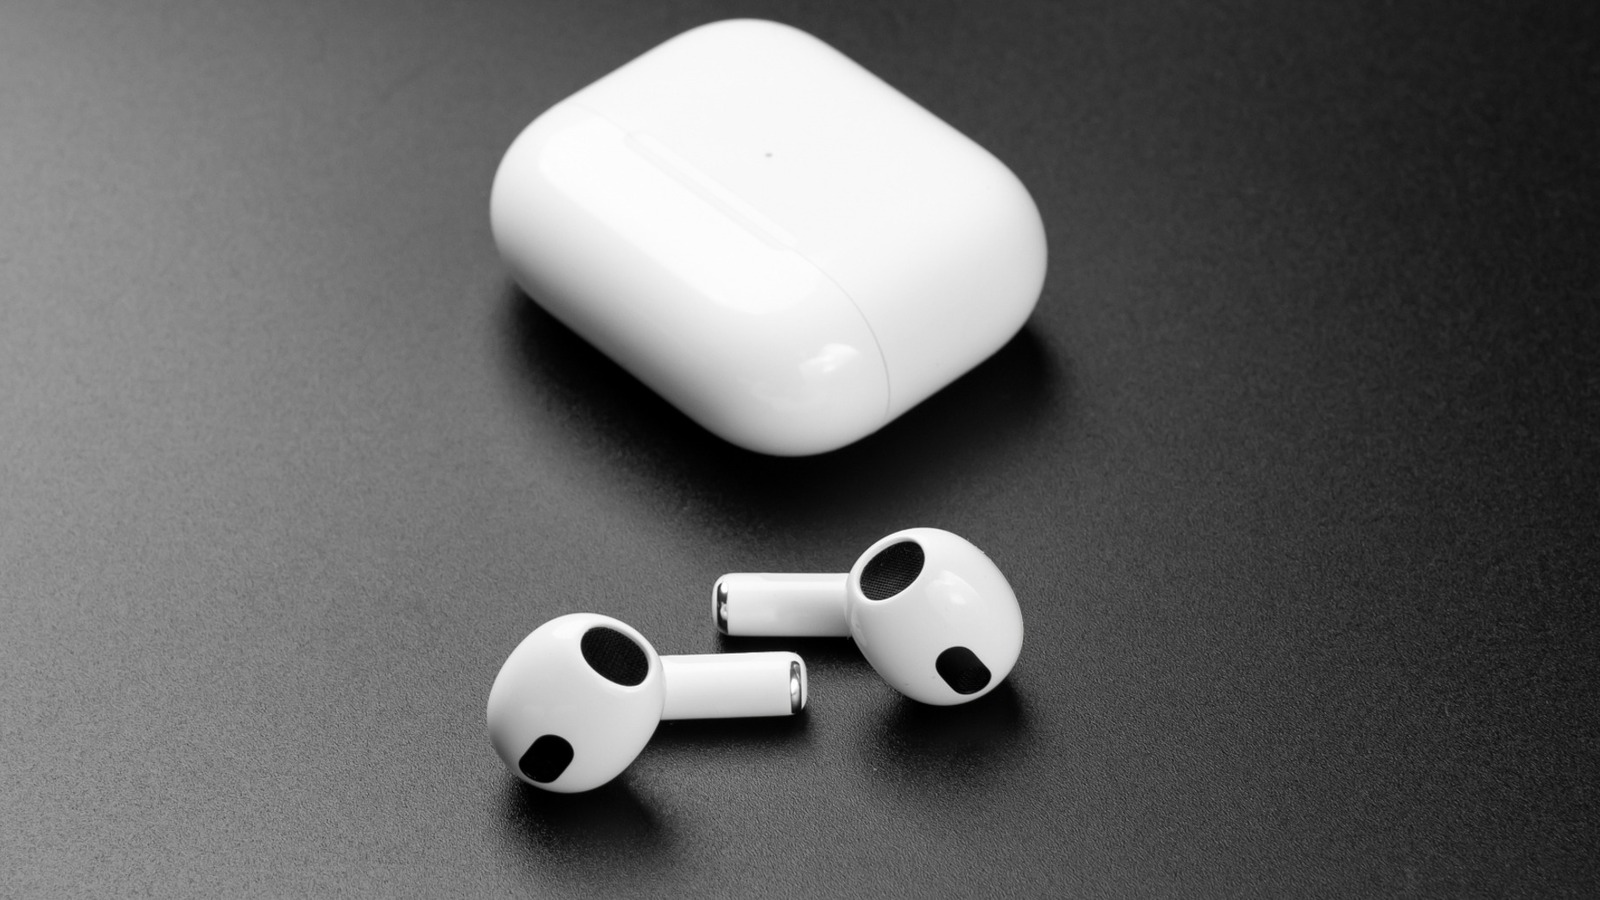 Will Cleaning Apple AirPods With Alcohol Damage Them?